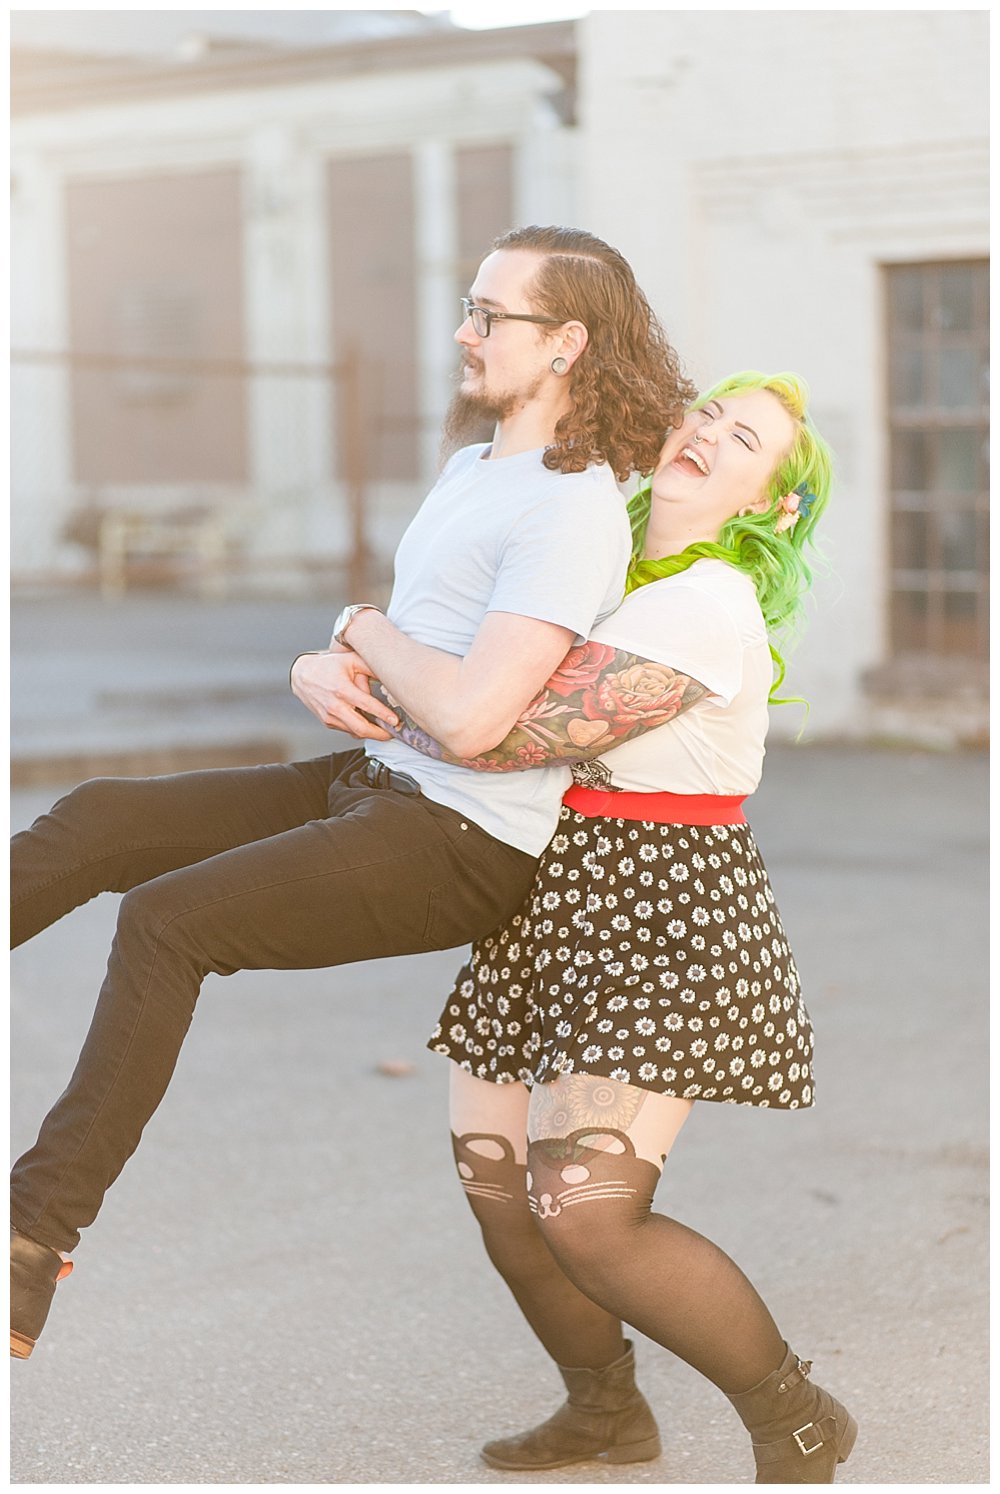 colorful hipster richmond engagement photography